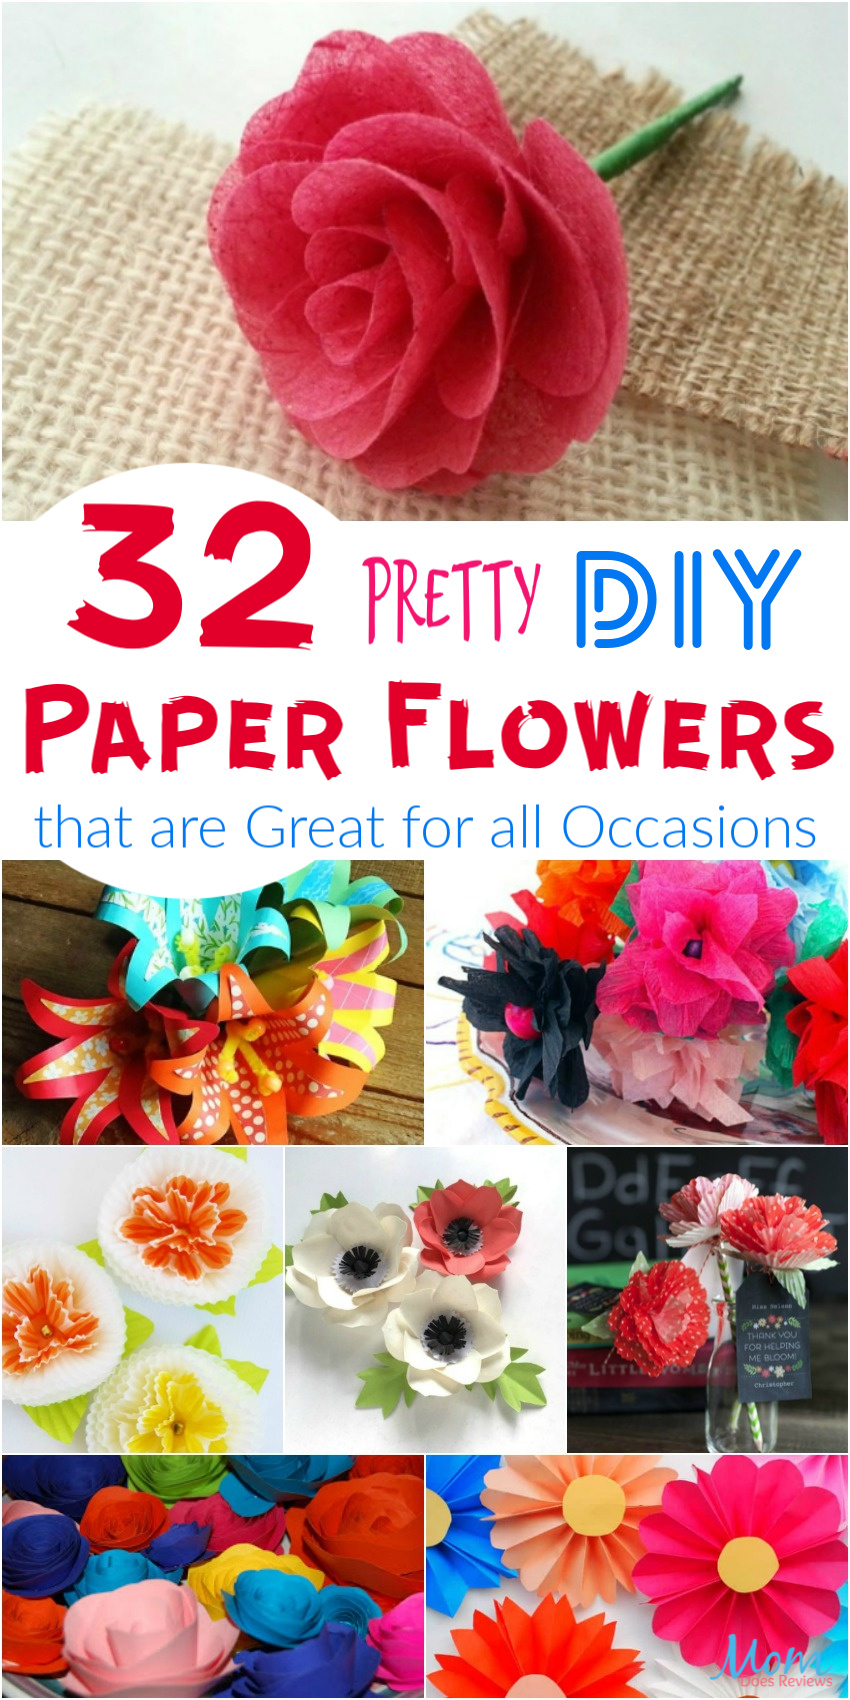 32 Pretty DIY Paper Flowers that are Great for all Occasions #crafts #diy #flowers #giftideas #funstuff